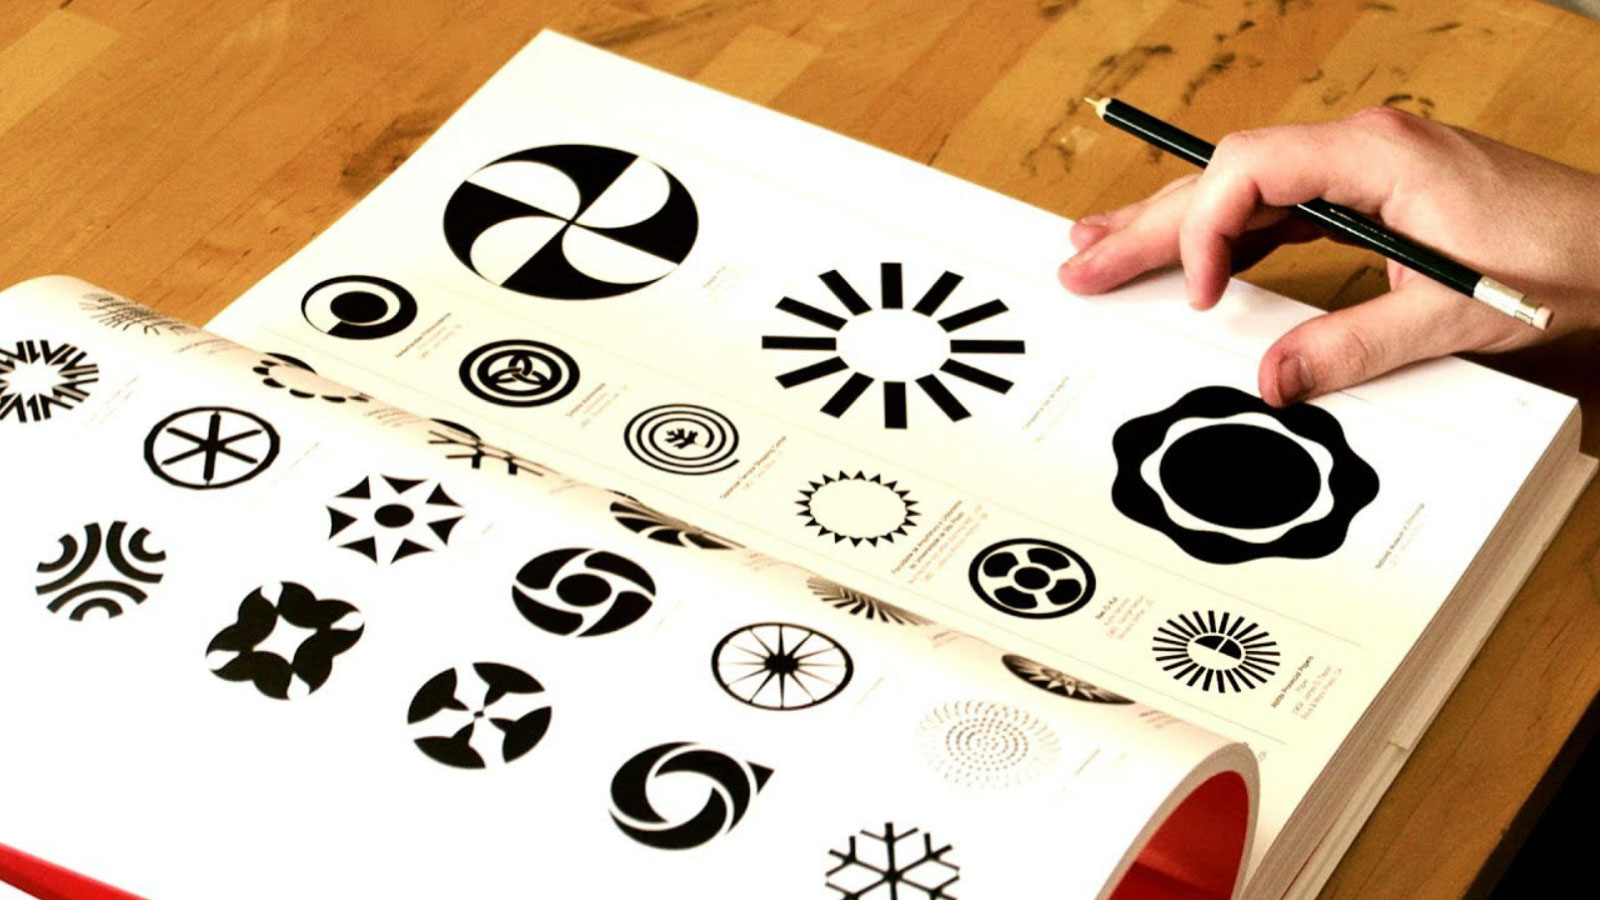 6_-The-7-types-of-logos-(and-how-to-use-them)